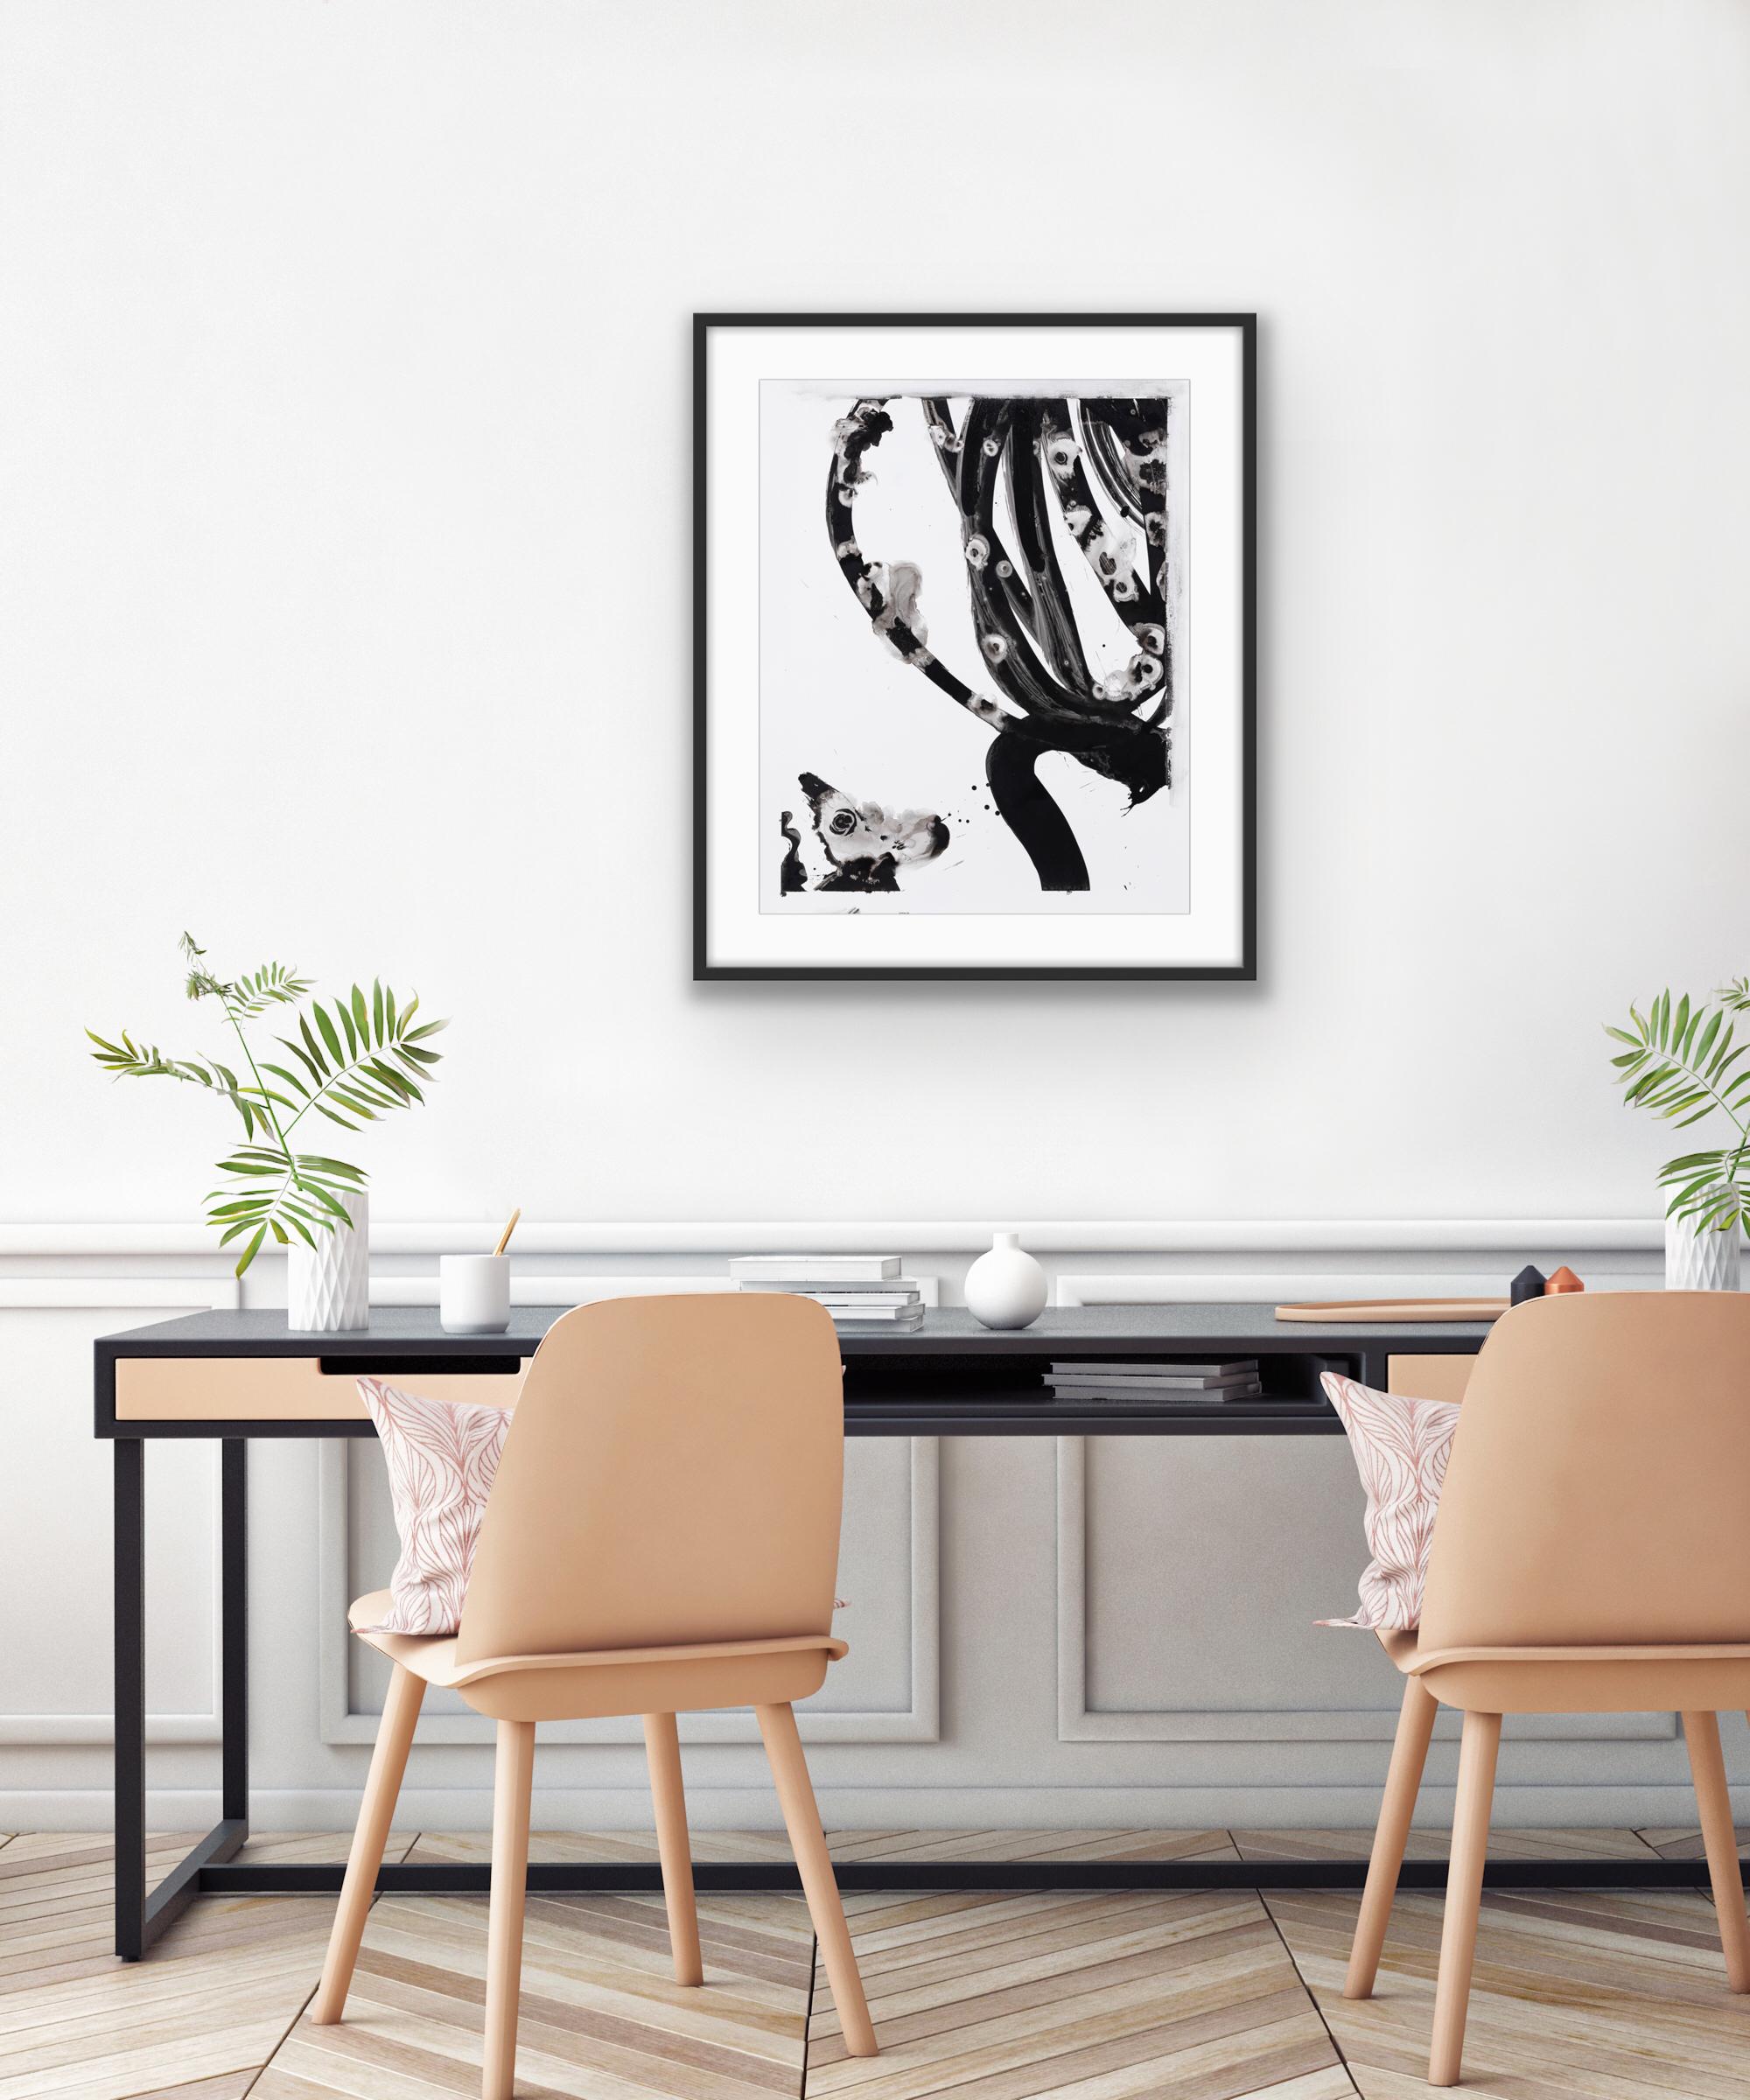 Black and white contemporary abstract painting by Christopher Rico - ink on Yupo paper. Offered unframed.

For this black and white series of paintings, Rico uses oversized calligraphy brushes on Yupo paper. He lays out long sheets on the floor and